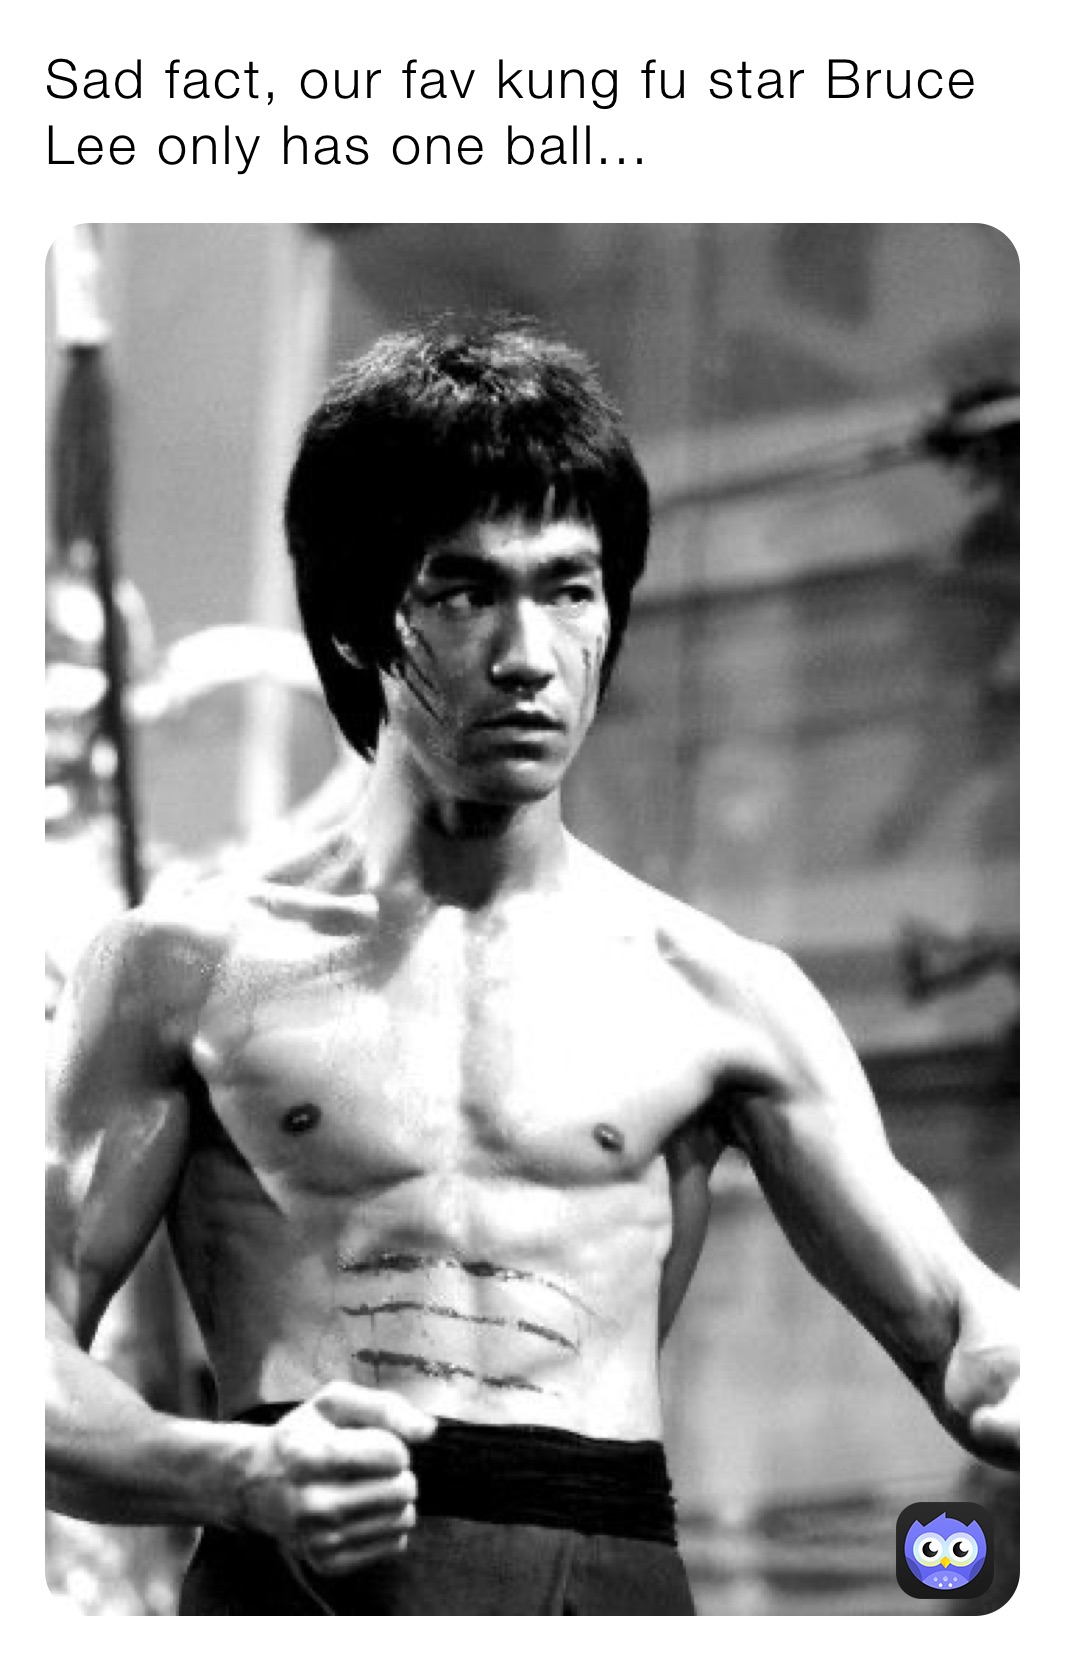 Sad fact, our fav kung fu star Bruce Lee only has one ball...